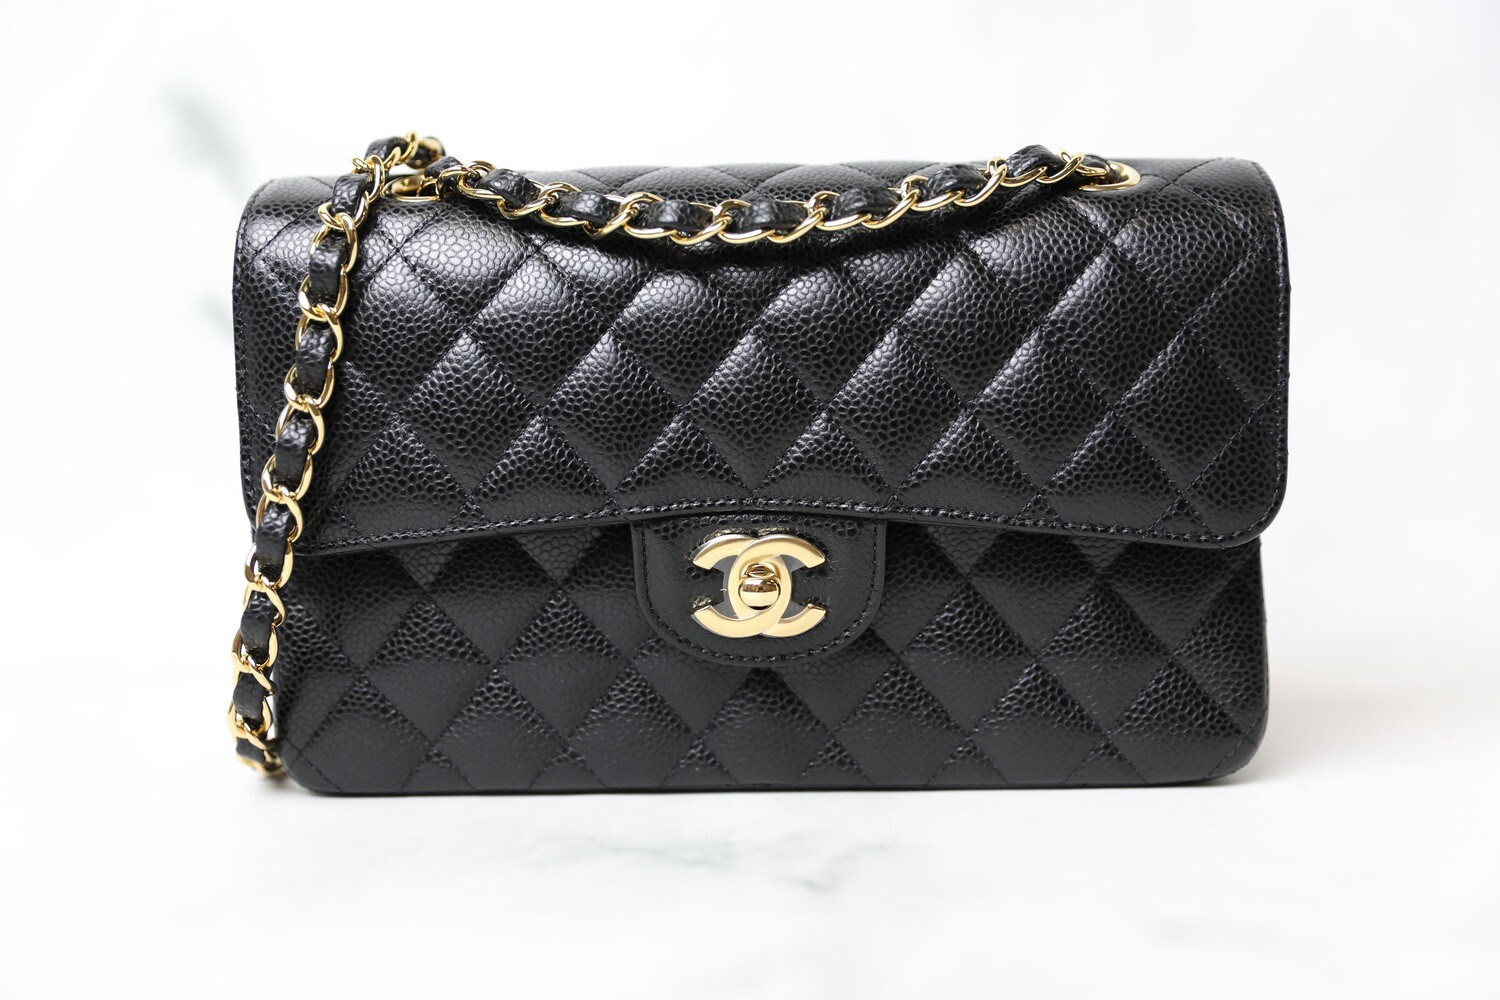 Chanel Classic Small Double Flap, Black Caviar Leather with Gold Hardware,  New in Box - Julia Rose Boston